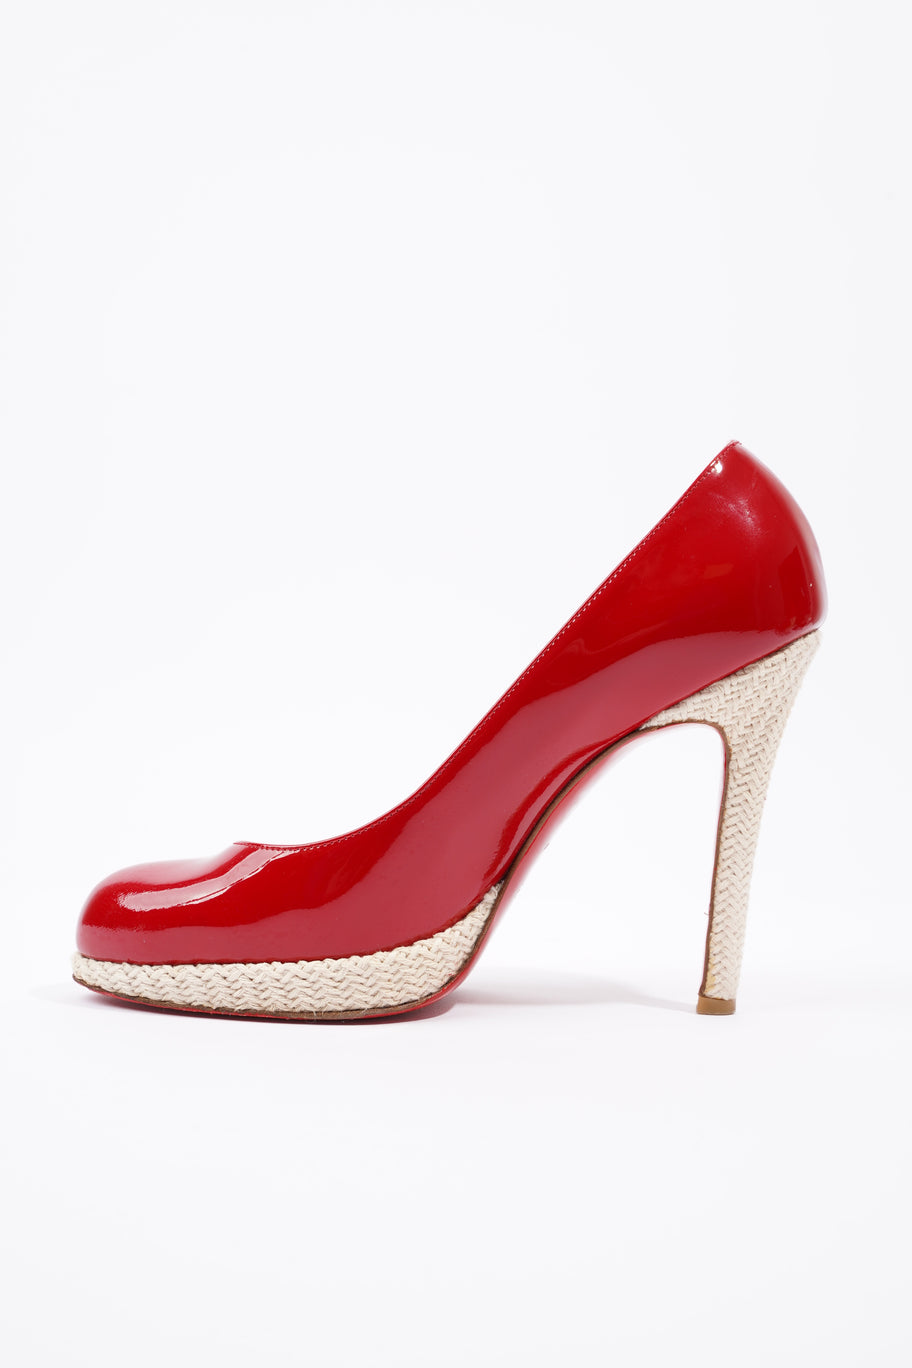 New Simple Pump 120 Red Patent Leather EU 39 UK 6 Image 2